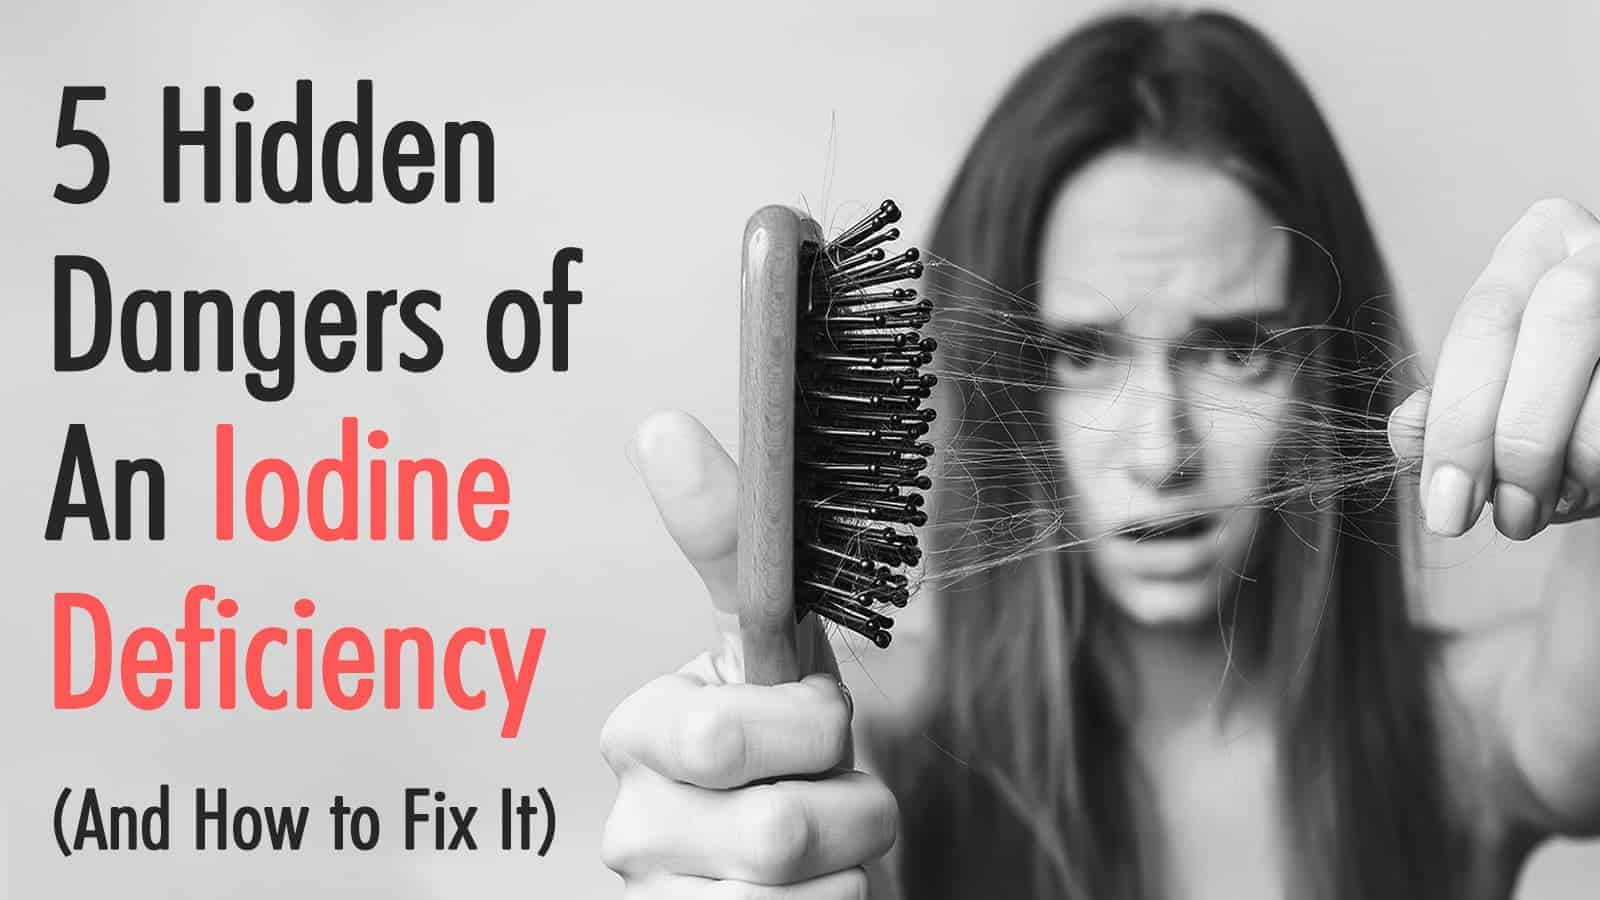 5 Hidden Dangers of An Iodine Deficiency (And How to Fix It)